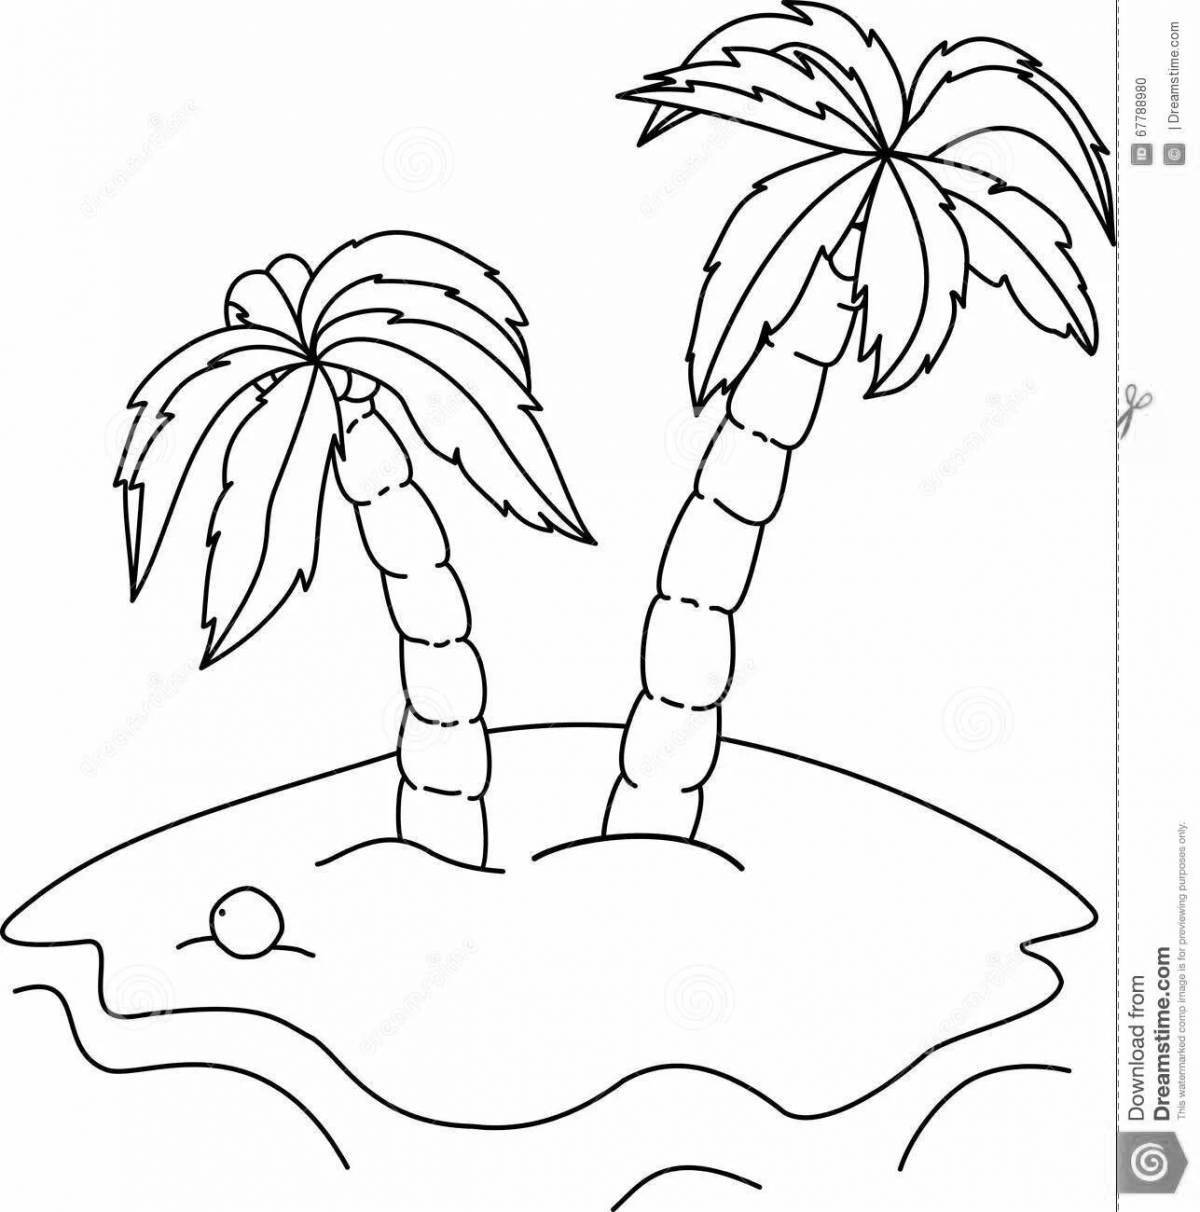 Glowing desert island coloring page